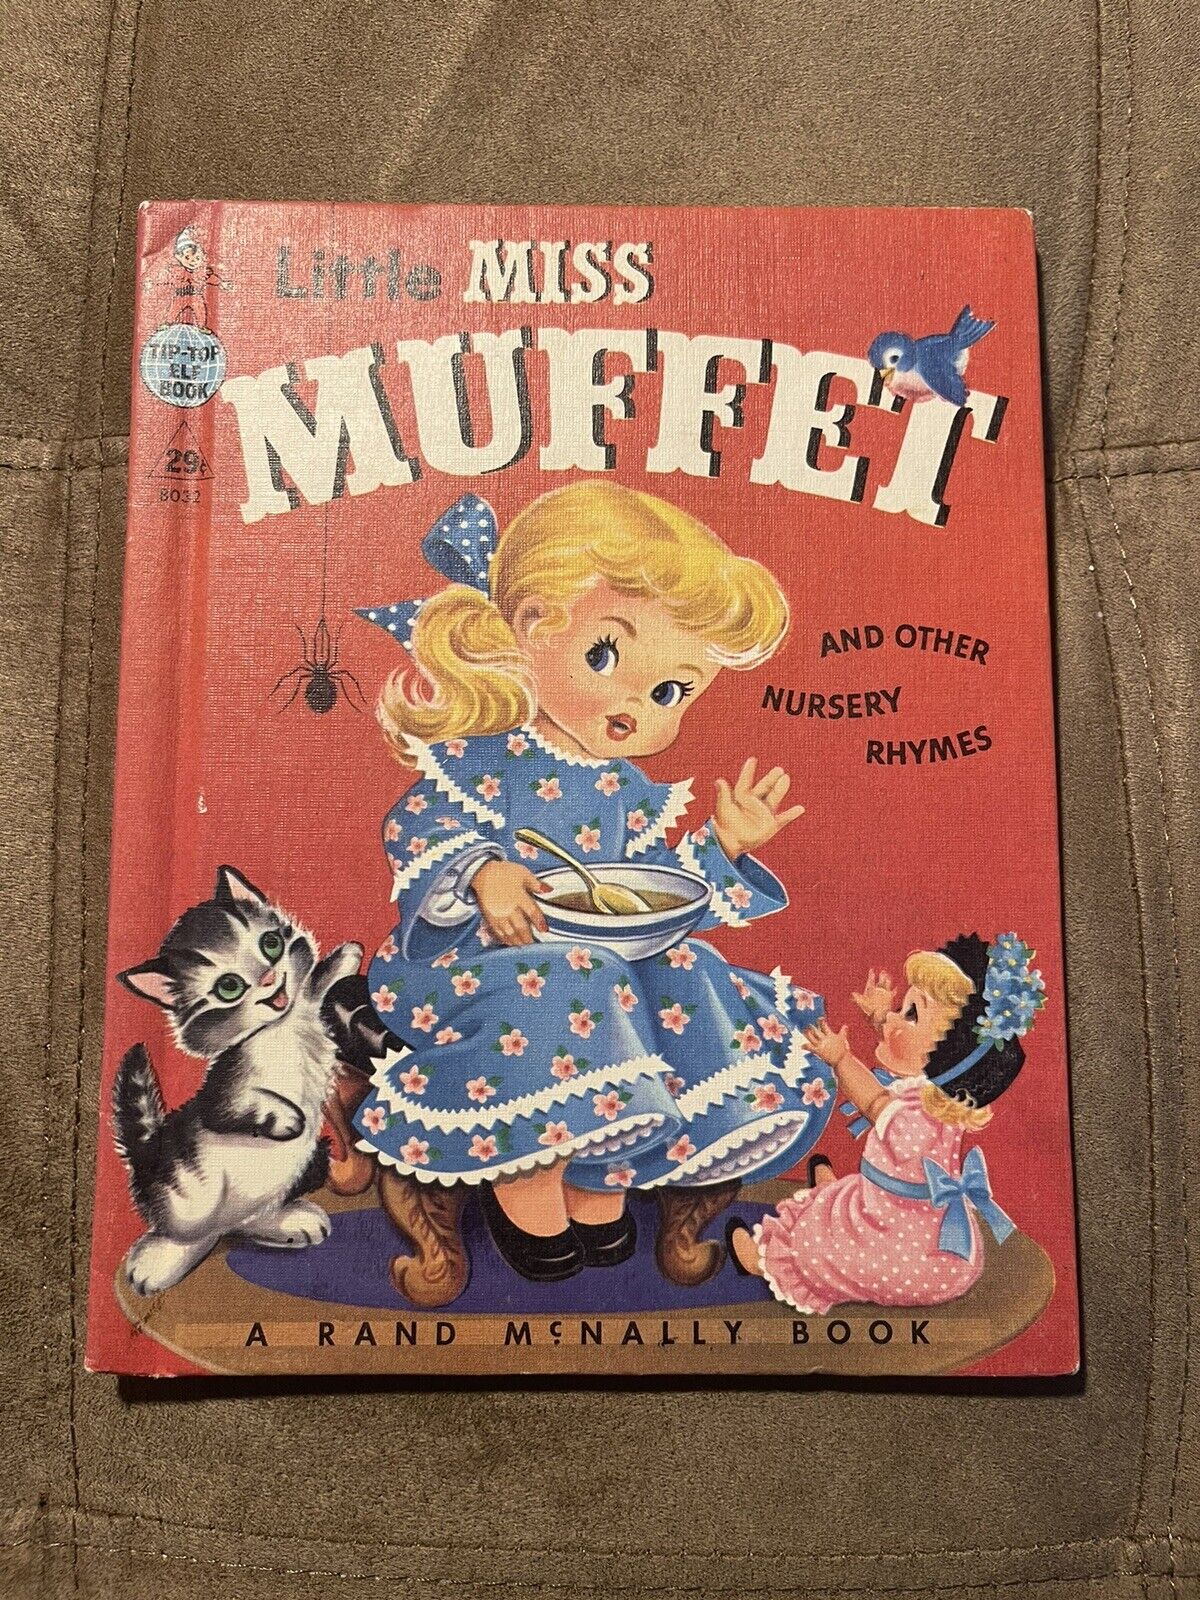 Vintage 1956 Tip-Top Elf Book Little Miss Muffet and Other Nursery Rhymes